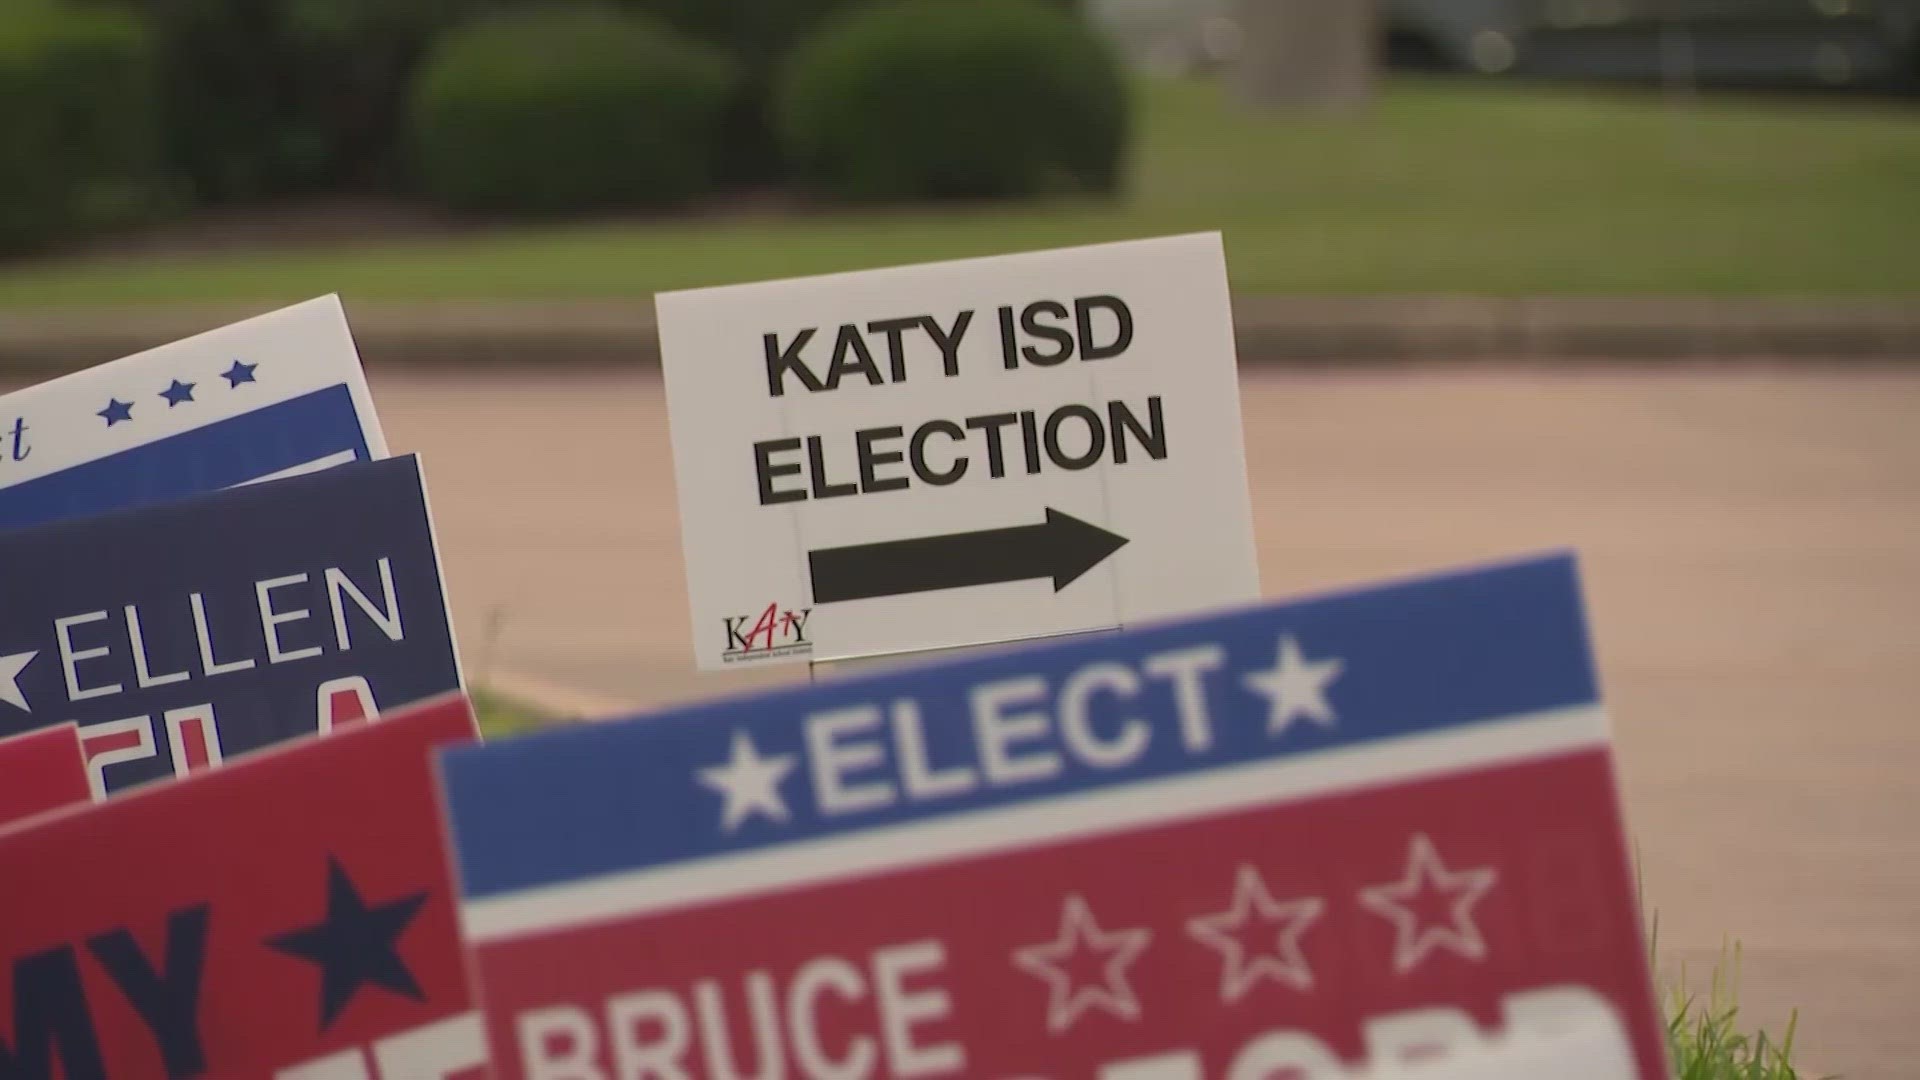 Early voting wraps up on Tuesday, but as the race enters its final days, conservative PACs are spending serious cash to get their preferred candidates elected.